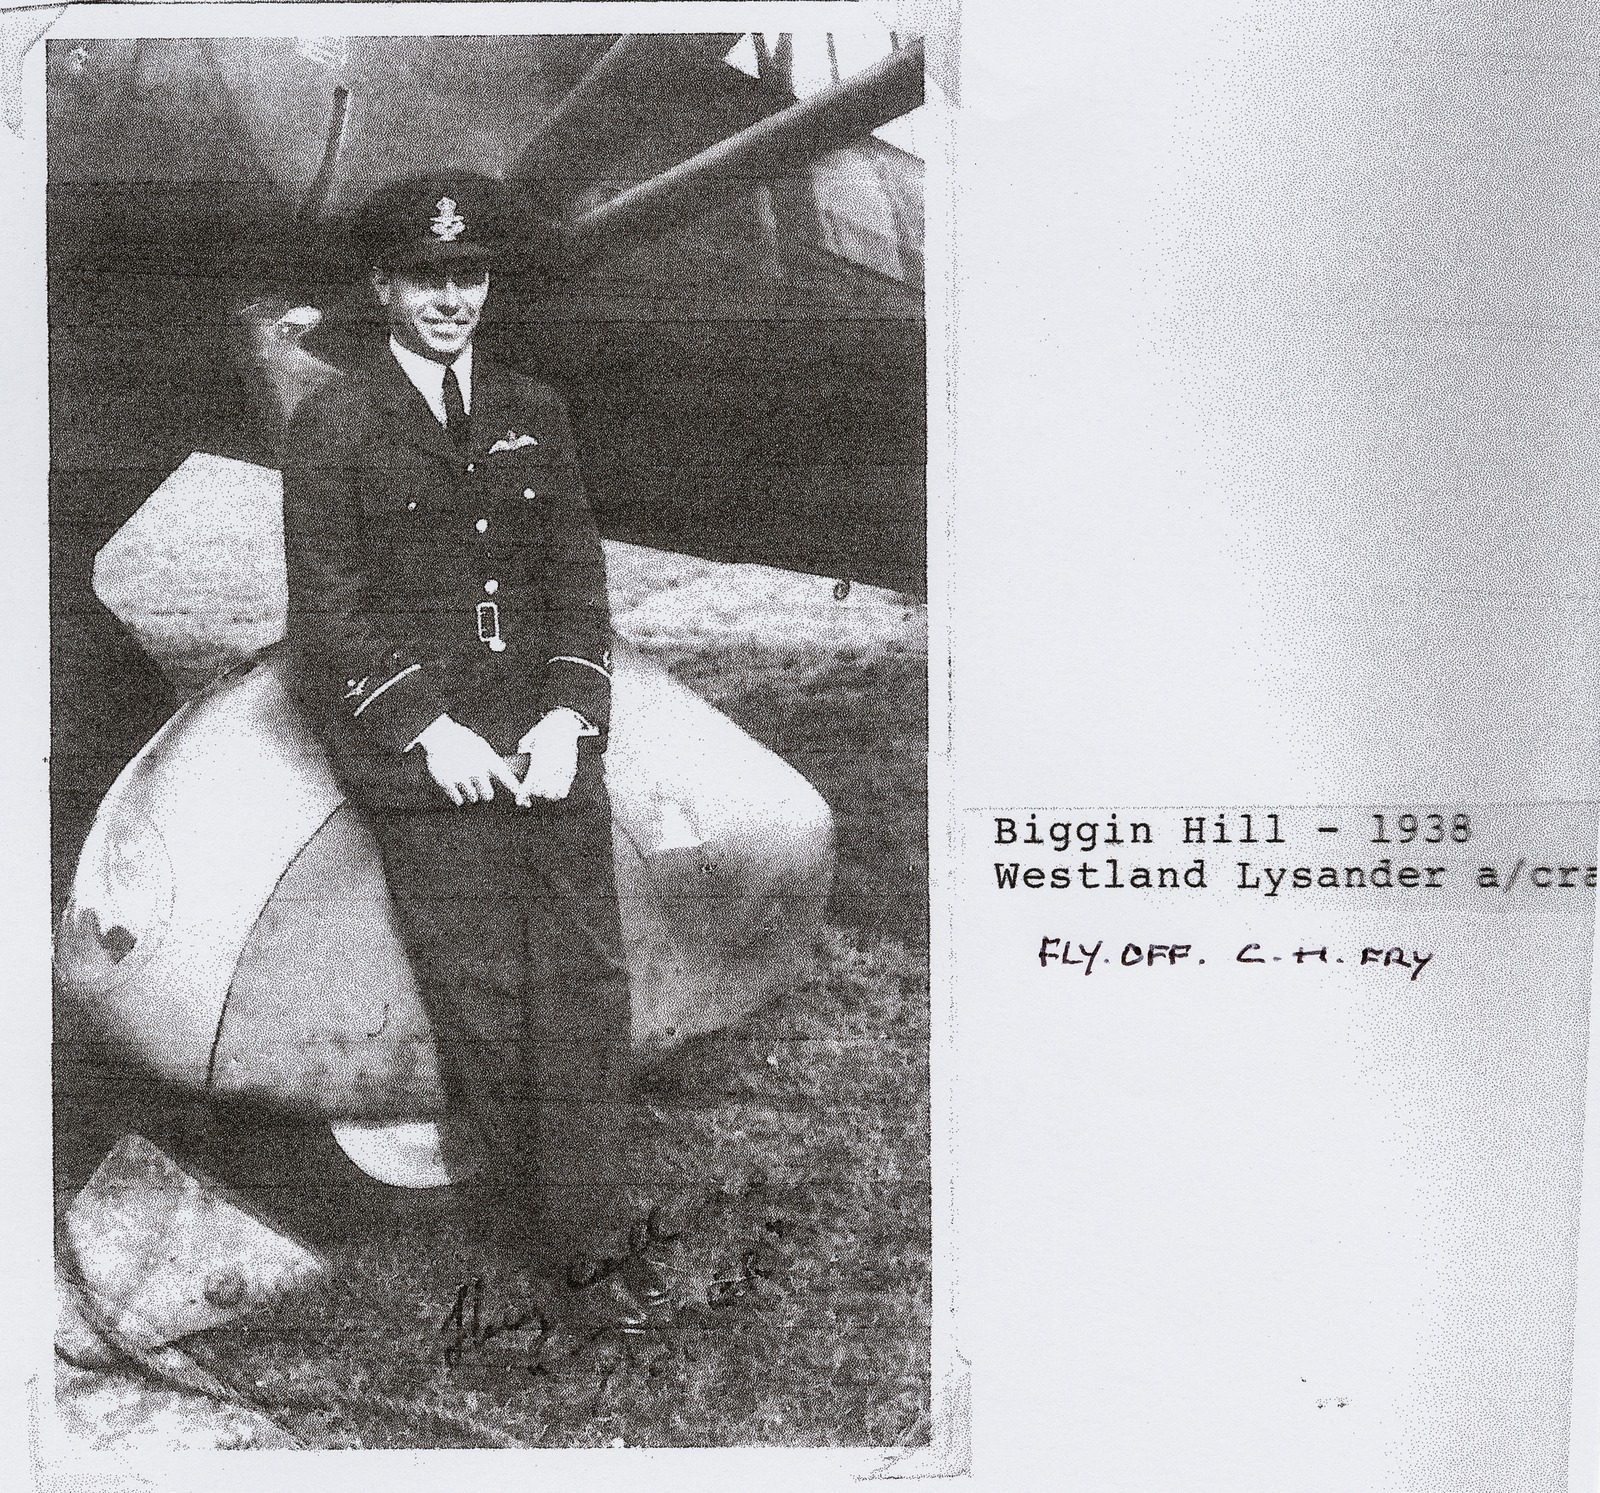 Charles Fry at Biggin Hill standing in front of a Westland Lysander aircraft, 1938